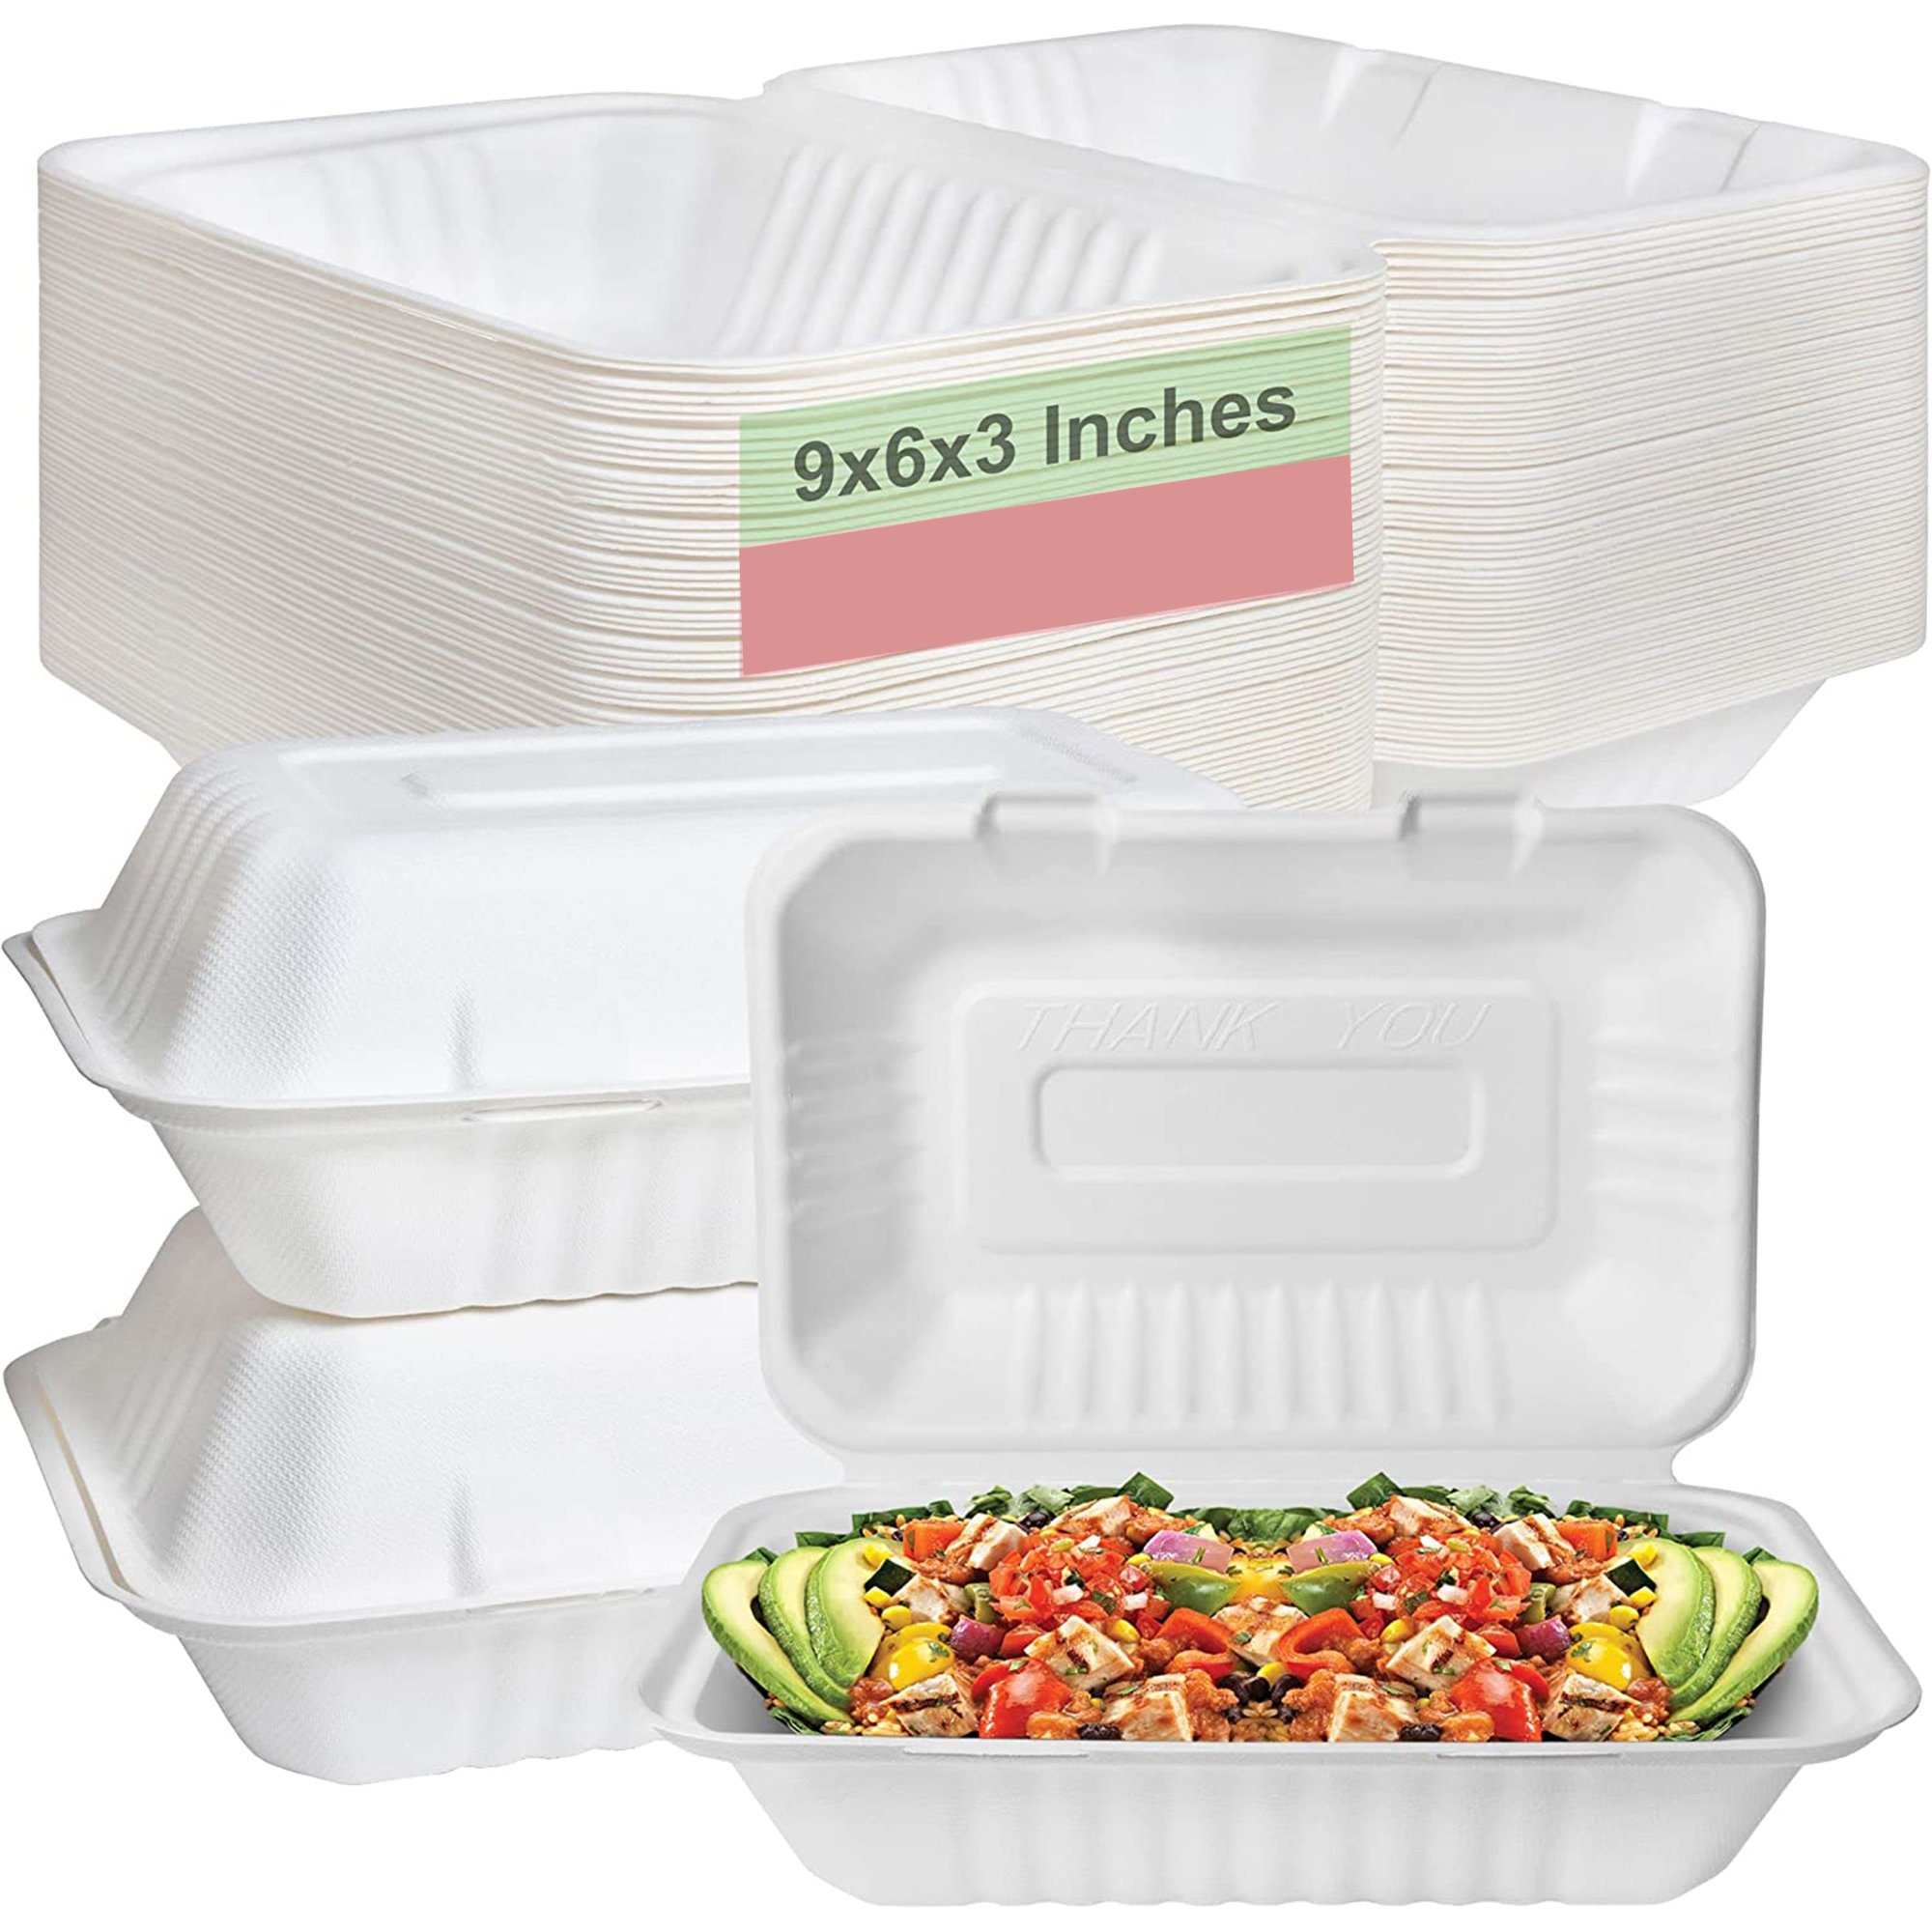  50 Pack Salad Container for Lunch Disposable Salad Bowls with  Lids - 48 oz Clear Plastic Bowls with Lids To Go - Airtight Leak Resistant  Round Meal Prep Bowls - Togo